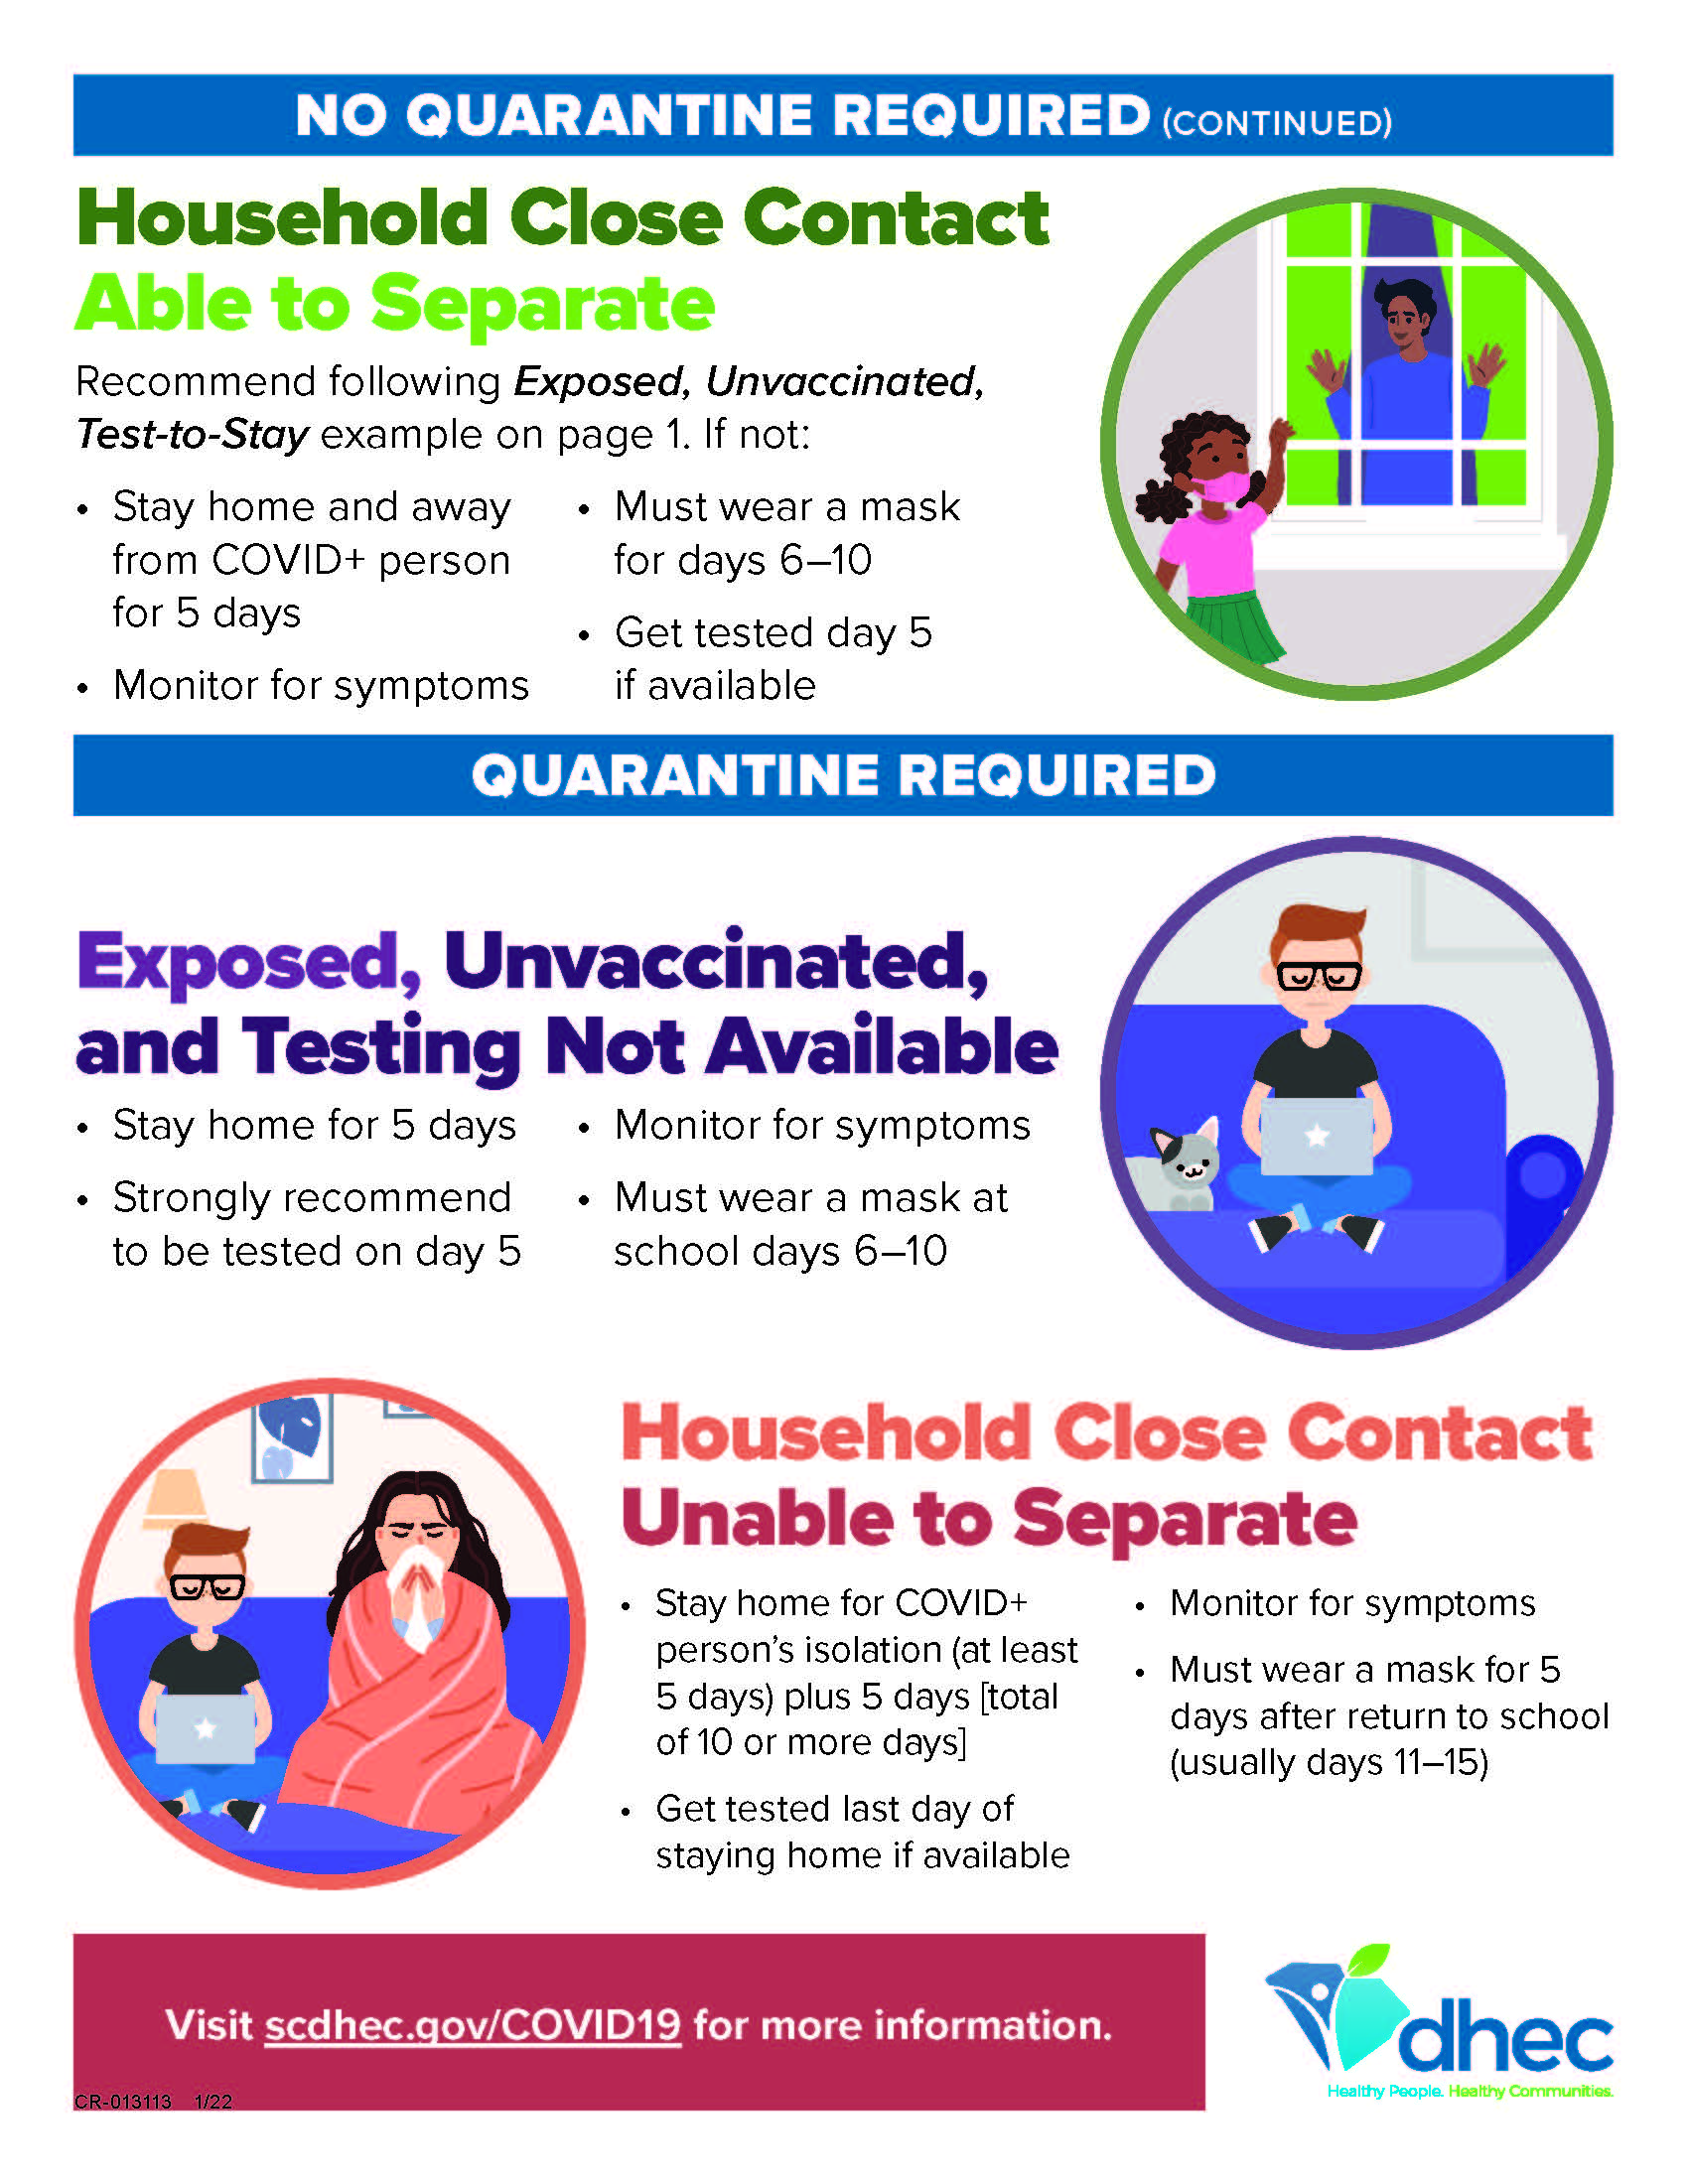 Visual aid for covid exposure guidelines that features vector illustrations of students on the couch at home. No Quarantine required (continued) Household close contact able to separate: Recommend following exposed, unvaccinated, test to stay example on page one. If not, stay home and away from covid+ person for 5 days. Monitor for symptoms. Must wear a mask for 6-10 days. Get tested day 5 if available. Quarantine Required: Exposed, unvaccinated, and testing not available. Stay home for 5 days, monitor for symptoms, must wear a mask at school days 6-10, strongly recommend to be tested on day 5. Household close contact unable to separate: Stay home for covid+ person’s isolation at least 5 days plus 5 days total of 10 or more days. Get tested last day of staying home if available. Monitor for symptoms. Must wear a mask for 5 days after return to school usually days 11-15. Visit scdhec.gov/covid19 for more information. Dhec health people, healthy communities logo.